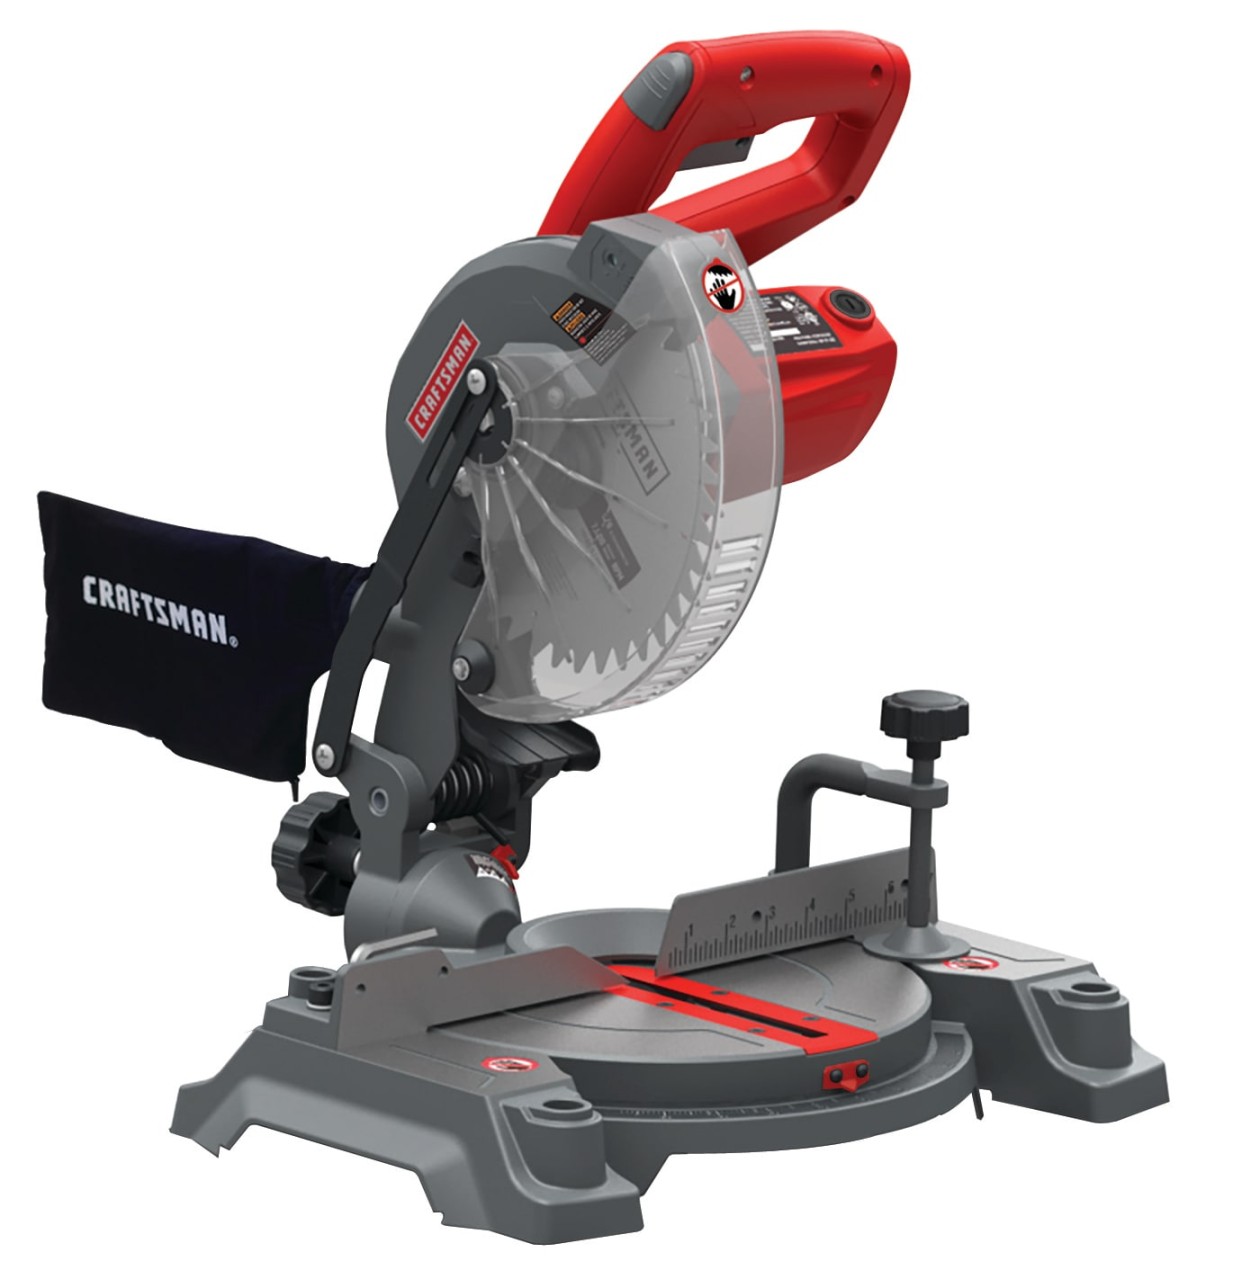 CRAFTSMAN -/-in -Amp Single Bevel Compound Corded Miter Saw in